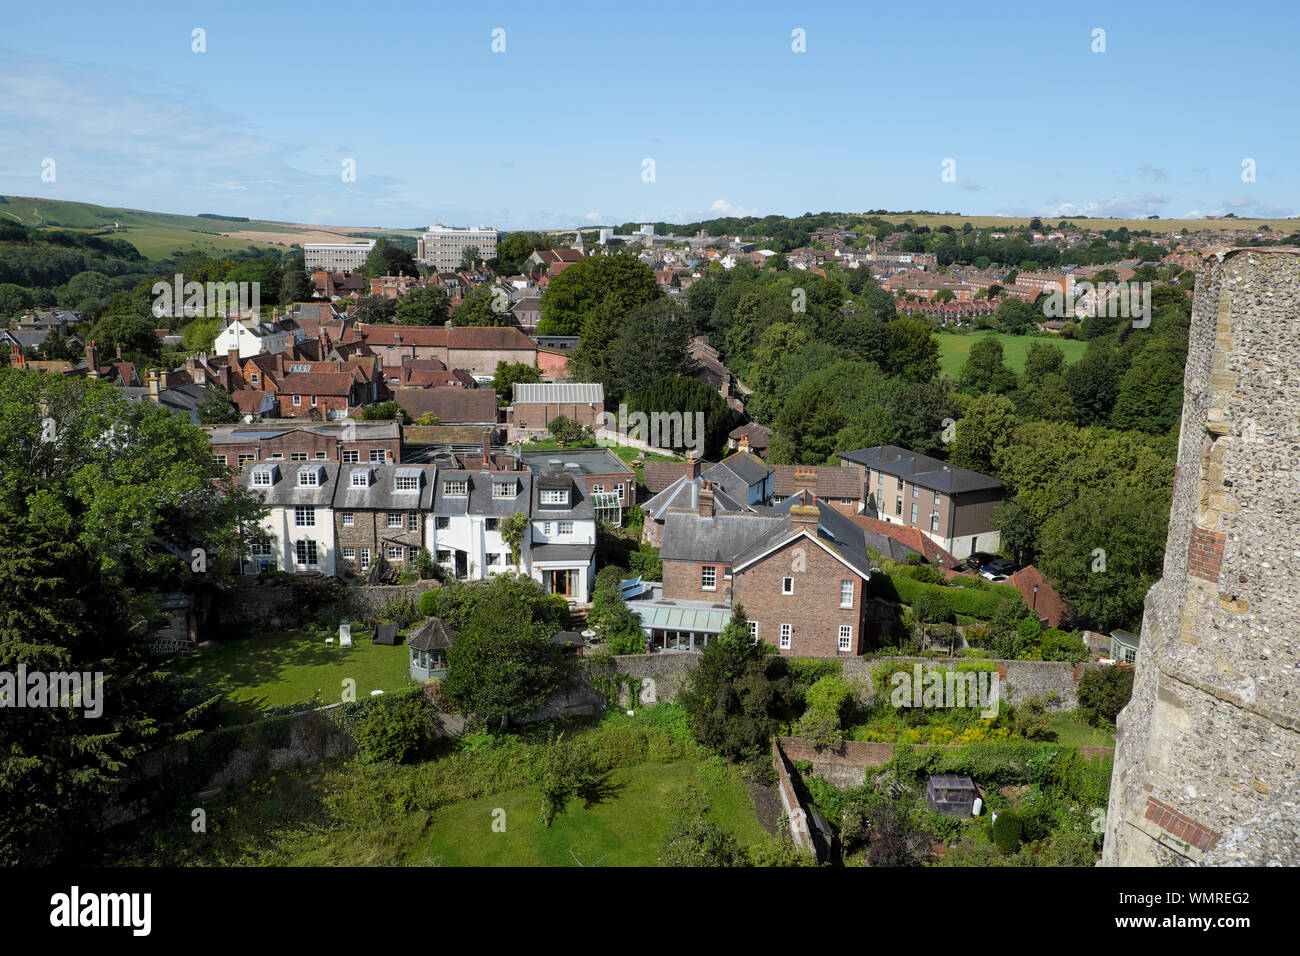 View over Lewes town houses, homes, housing, gardens and countryside landscape from Lewes Castle South Tower in Sussex England UK  KATHY DEWITT Stock Photo